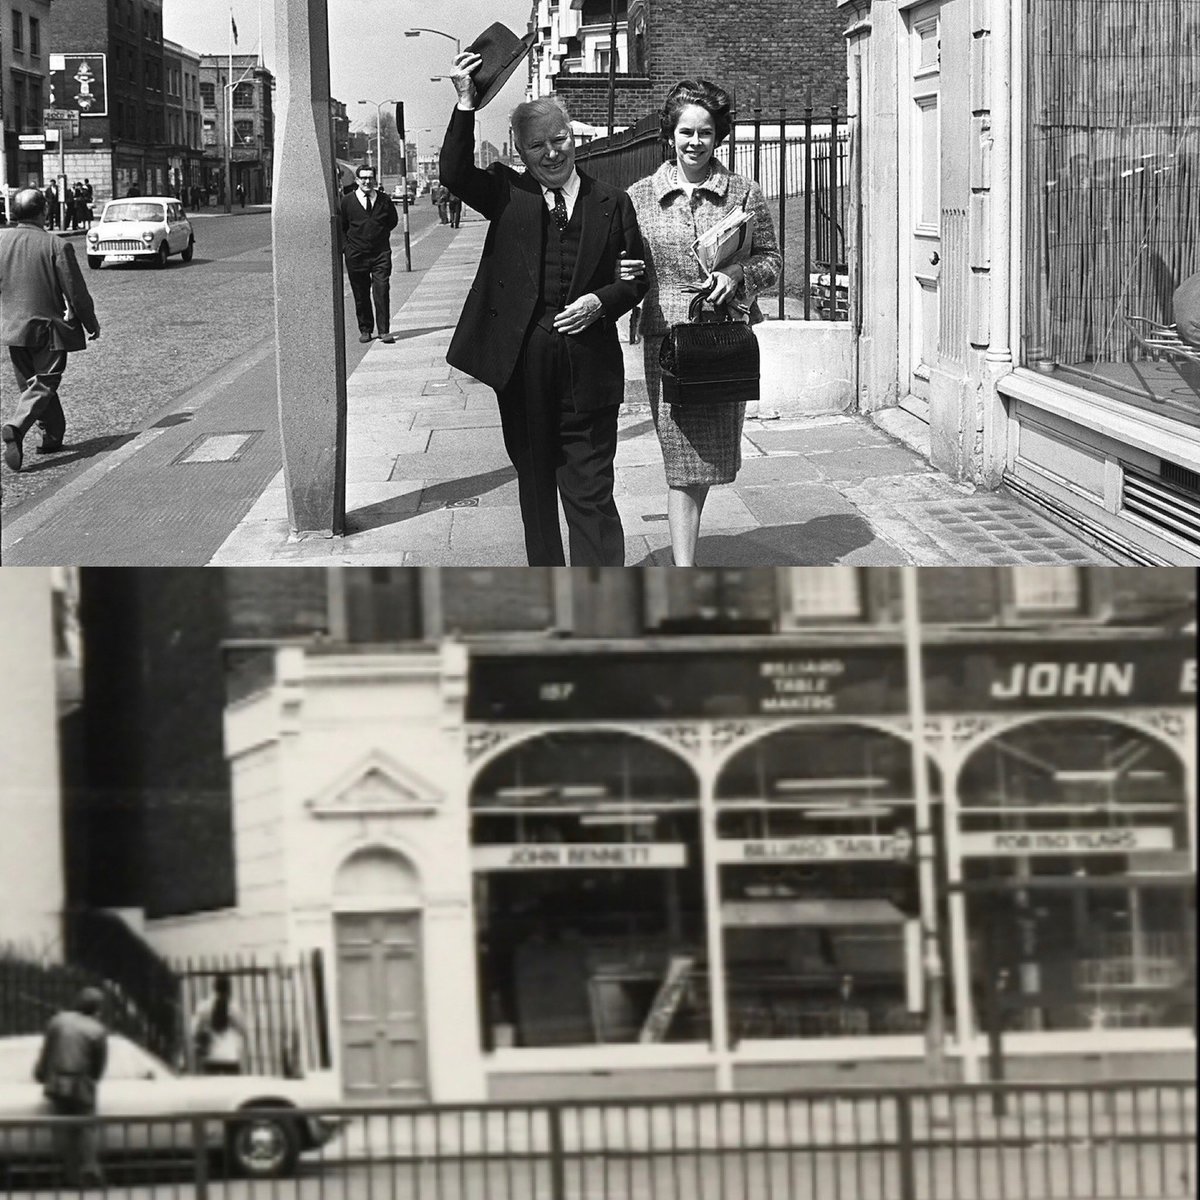 4th of 5 pics of #OldKentRoad #London 
Here’s the legendary #CharlieChaplin on his manor approaching John Bennett’s Sport Shop, famous for its #Snooker tables
Can’t find a full pic of a once great sports shop…